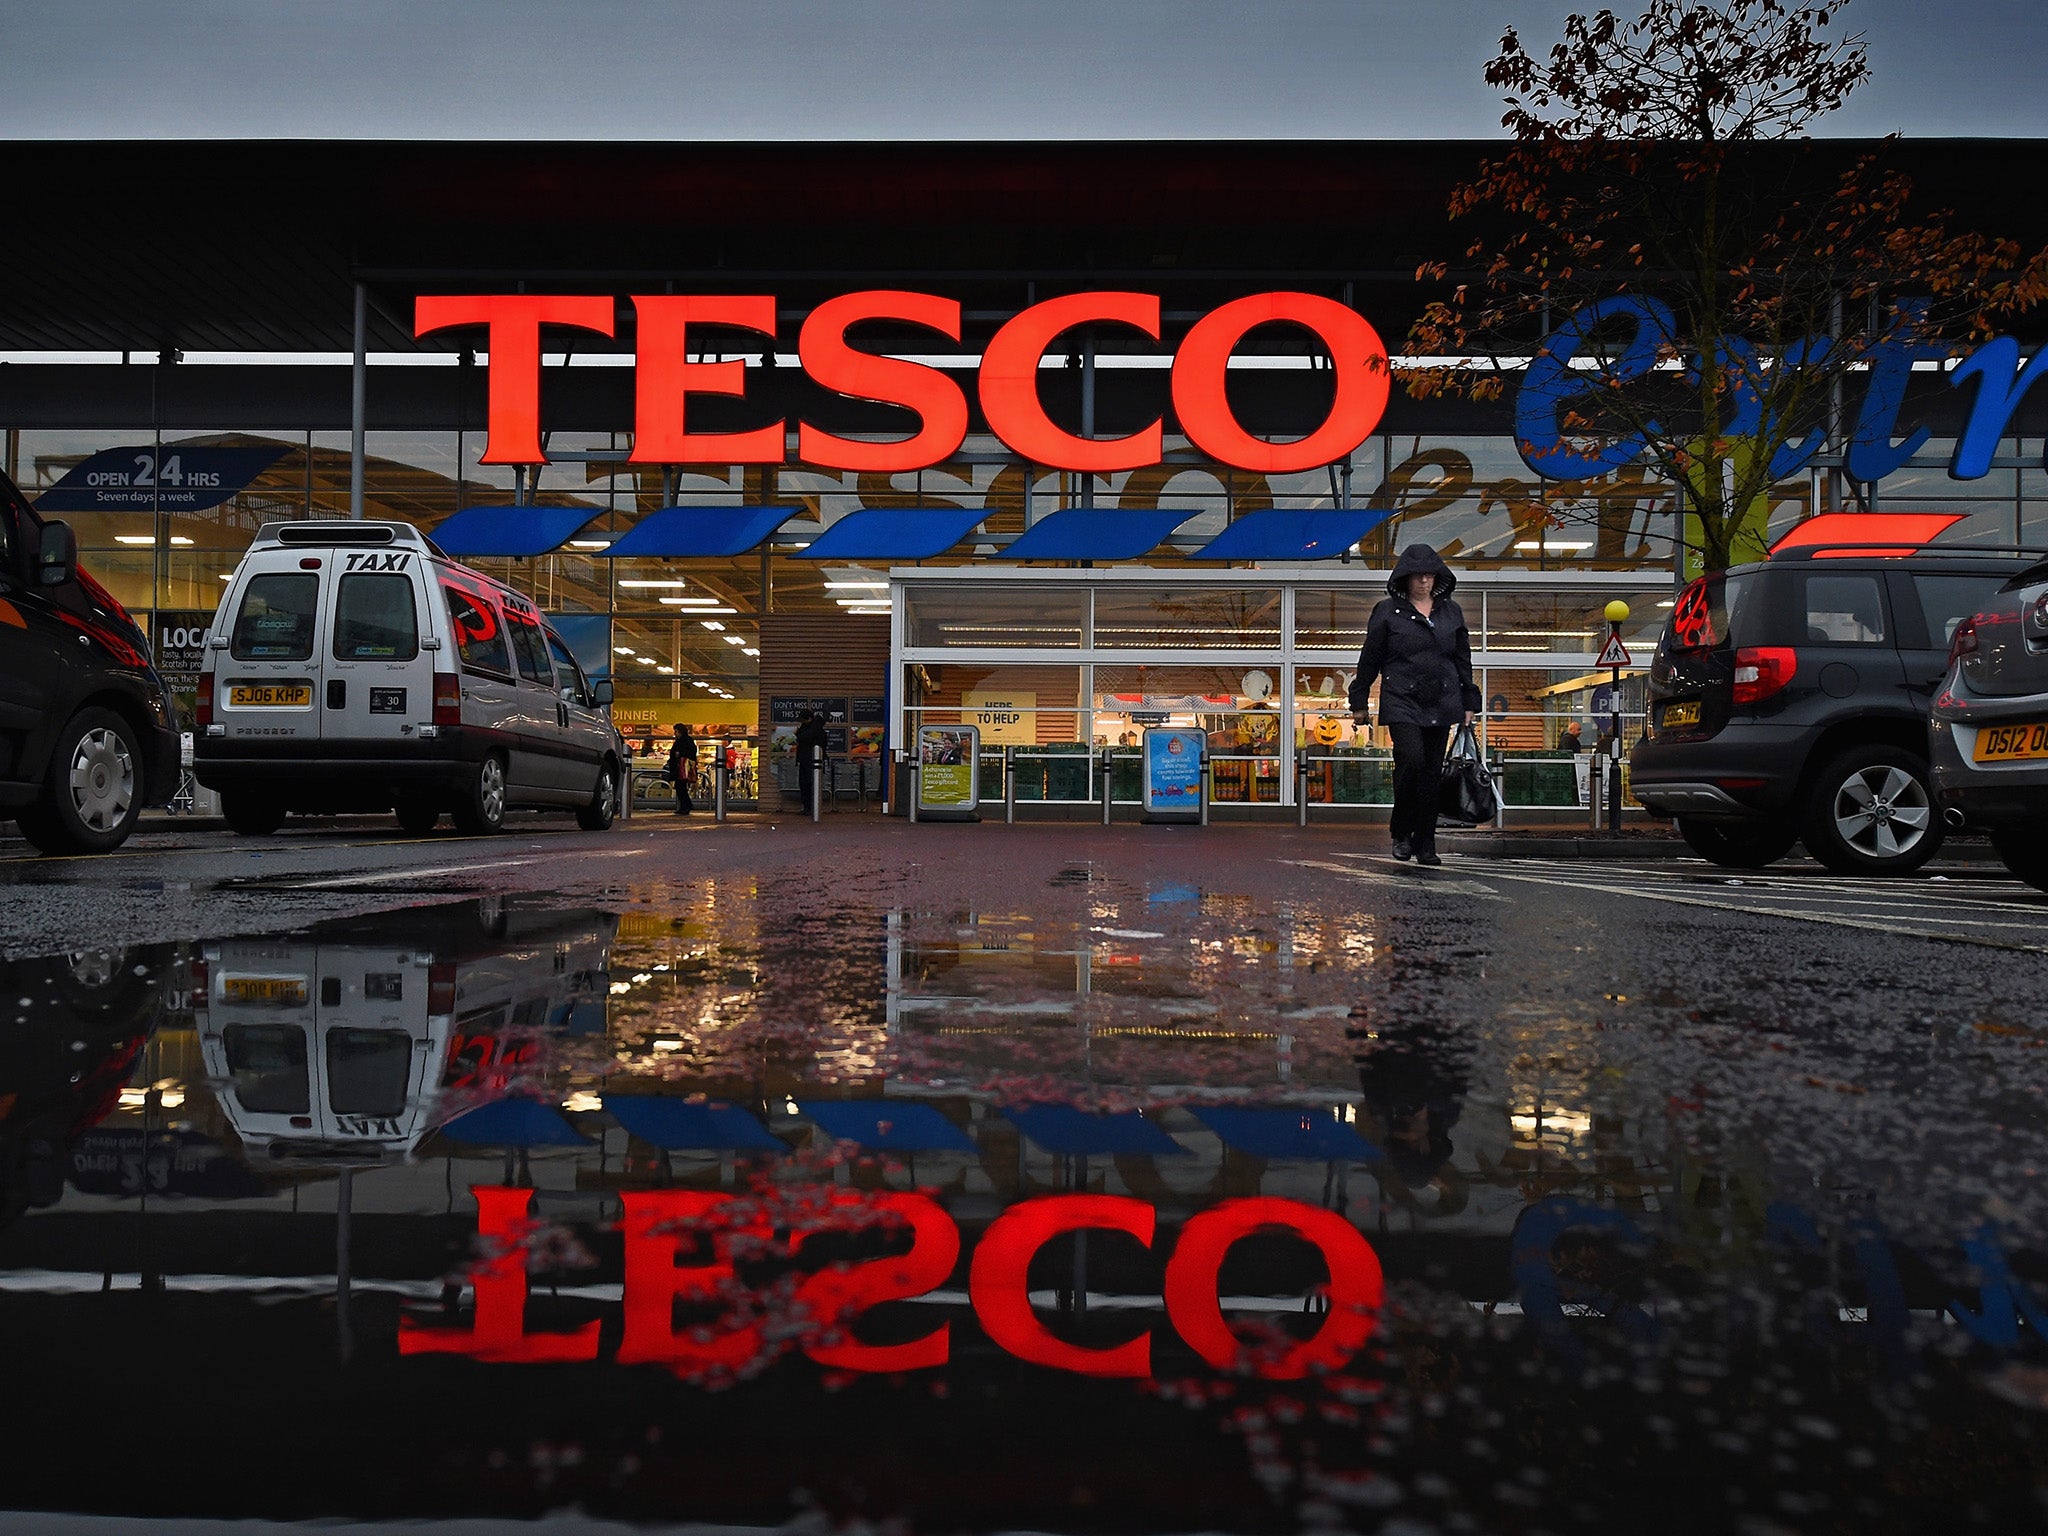 Tesco Criticised For Refusing Parking To Mother Because She